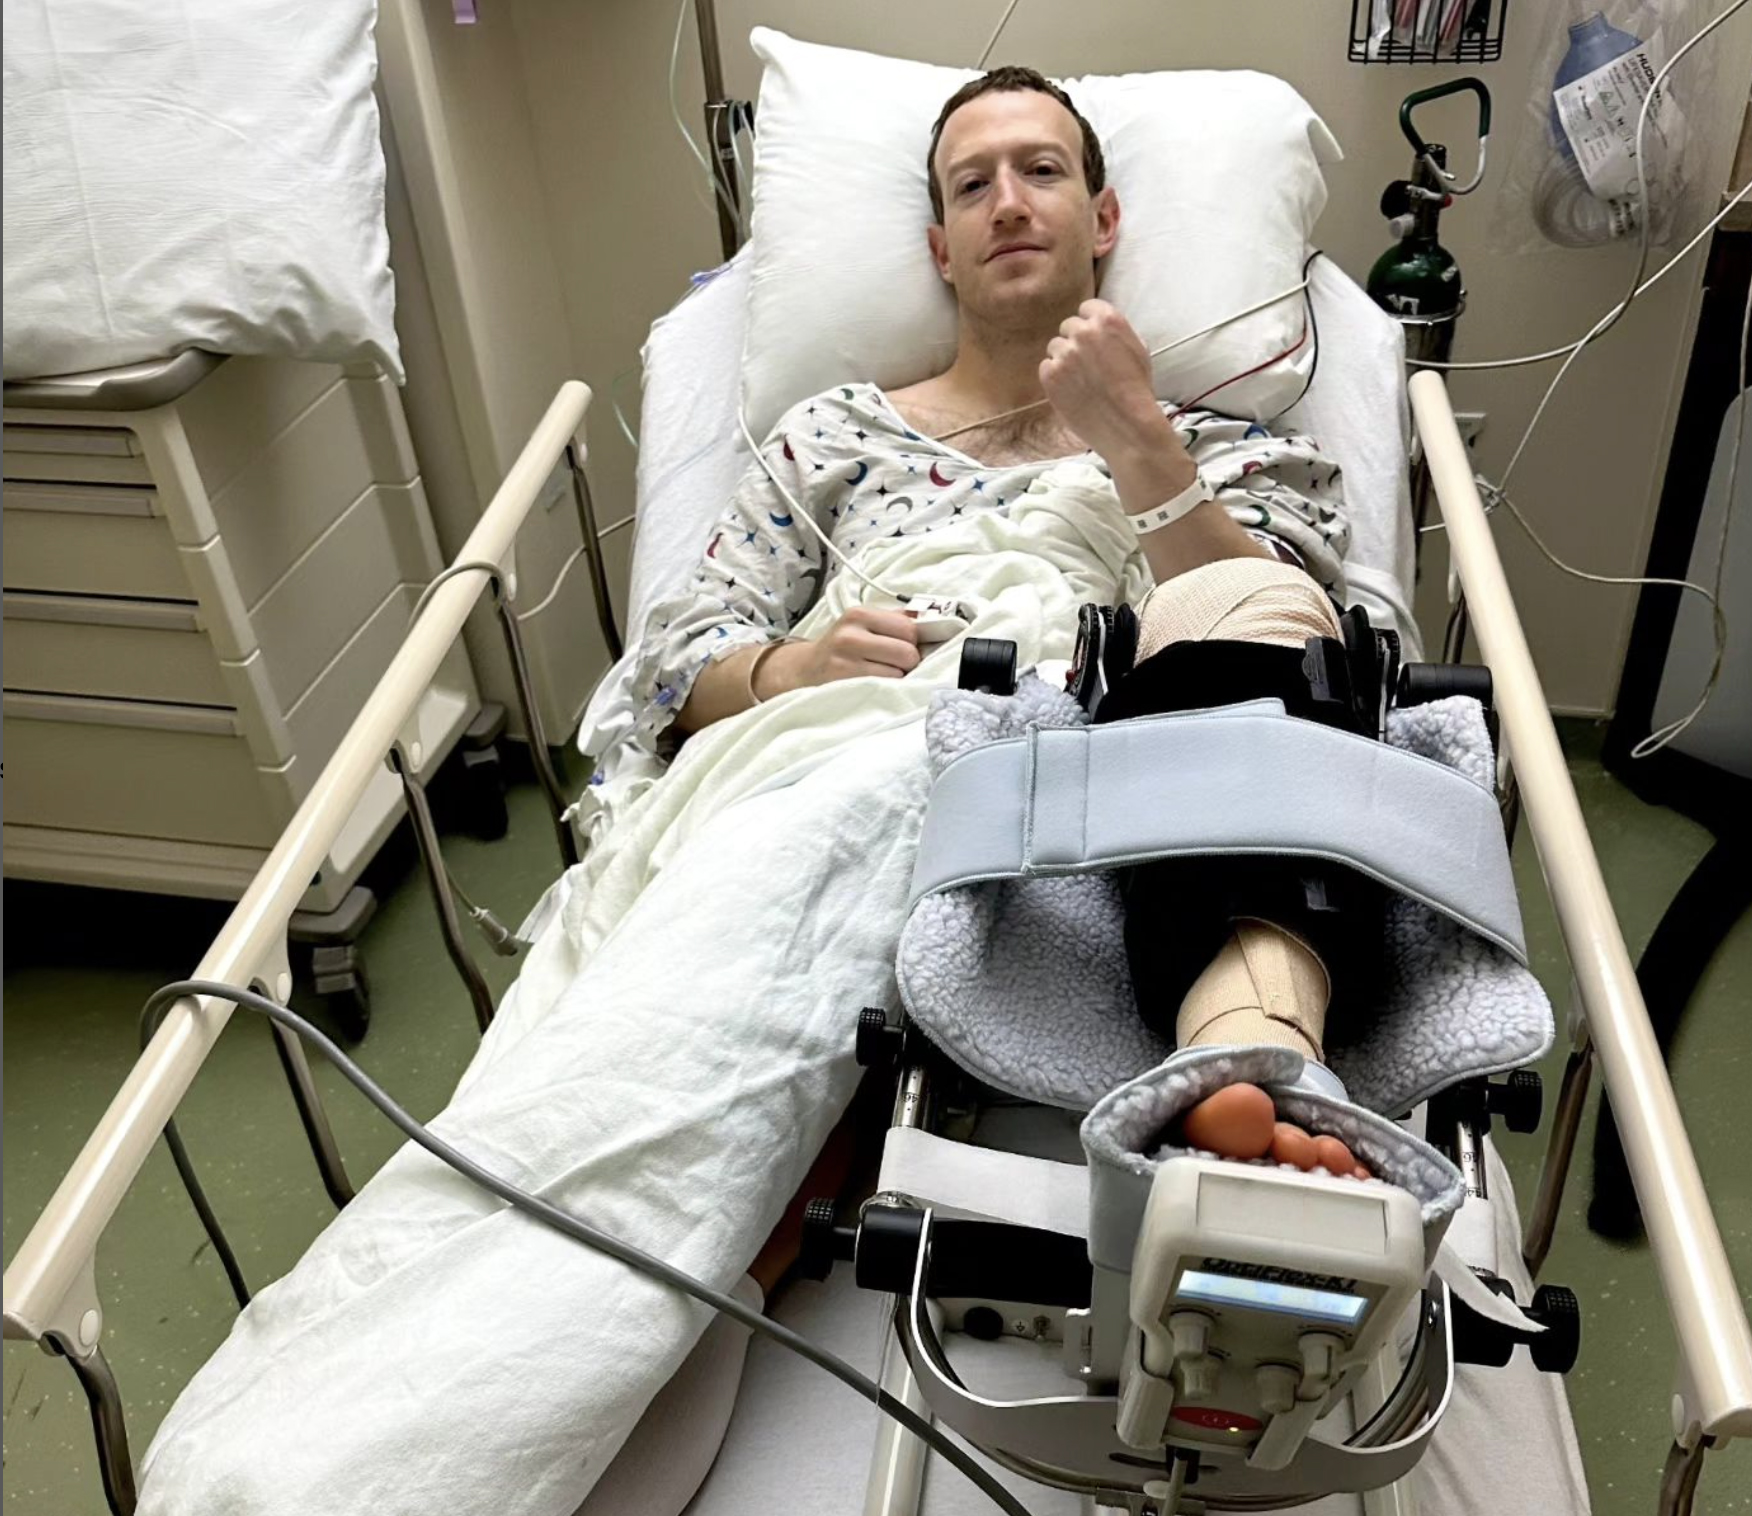 Mark Zuckerberg posted a photo from a hospital bed on his Instagram platform, announcing that he had torn his ACL and had undergone surgery.